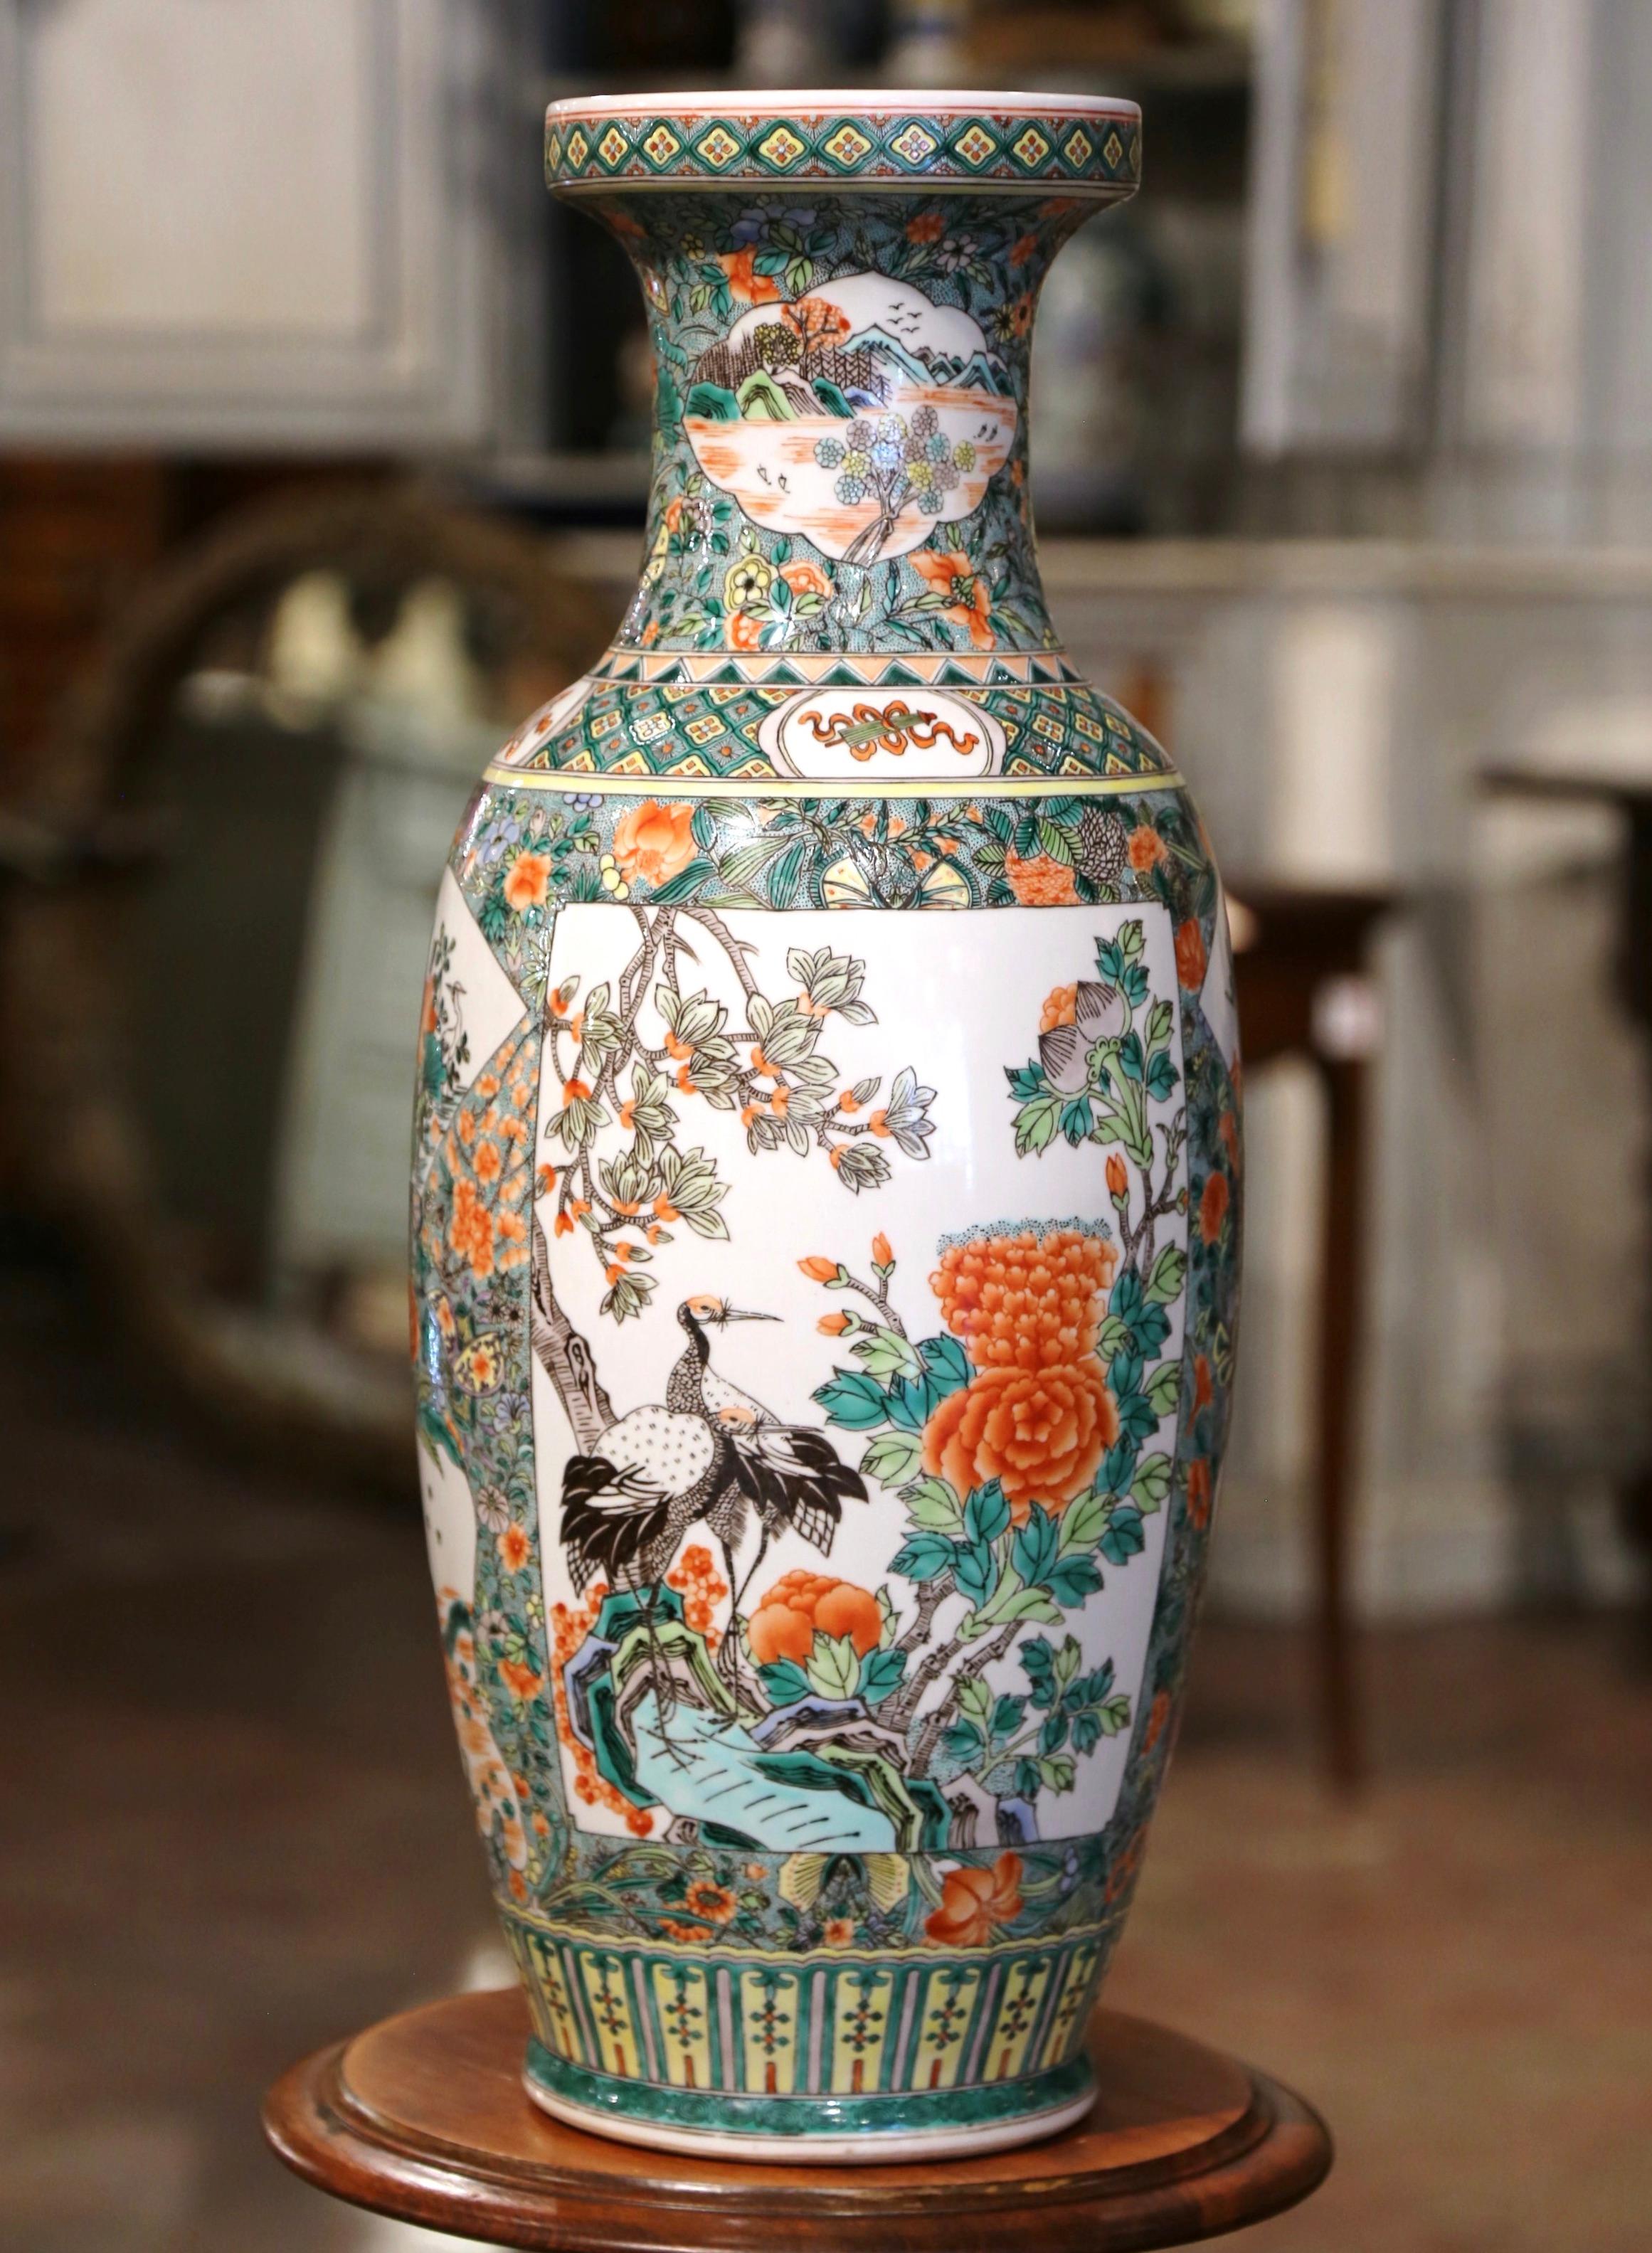 Decorate a table or a console with this colorful antique porcelain vase. Crafted in China circa 1950, the important Family Verte vessel is round in shape decorated with a wide neck at the top. The tall vase is embellished with hand painted avian and